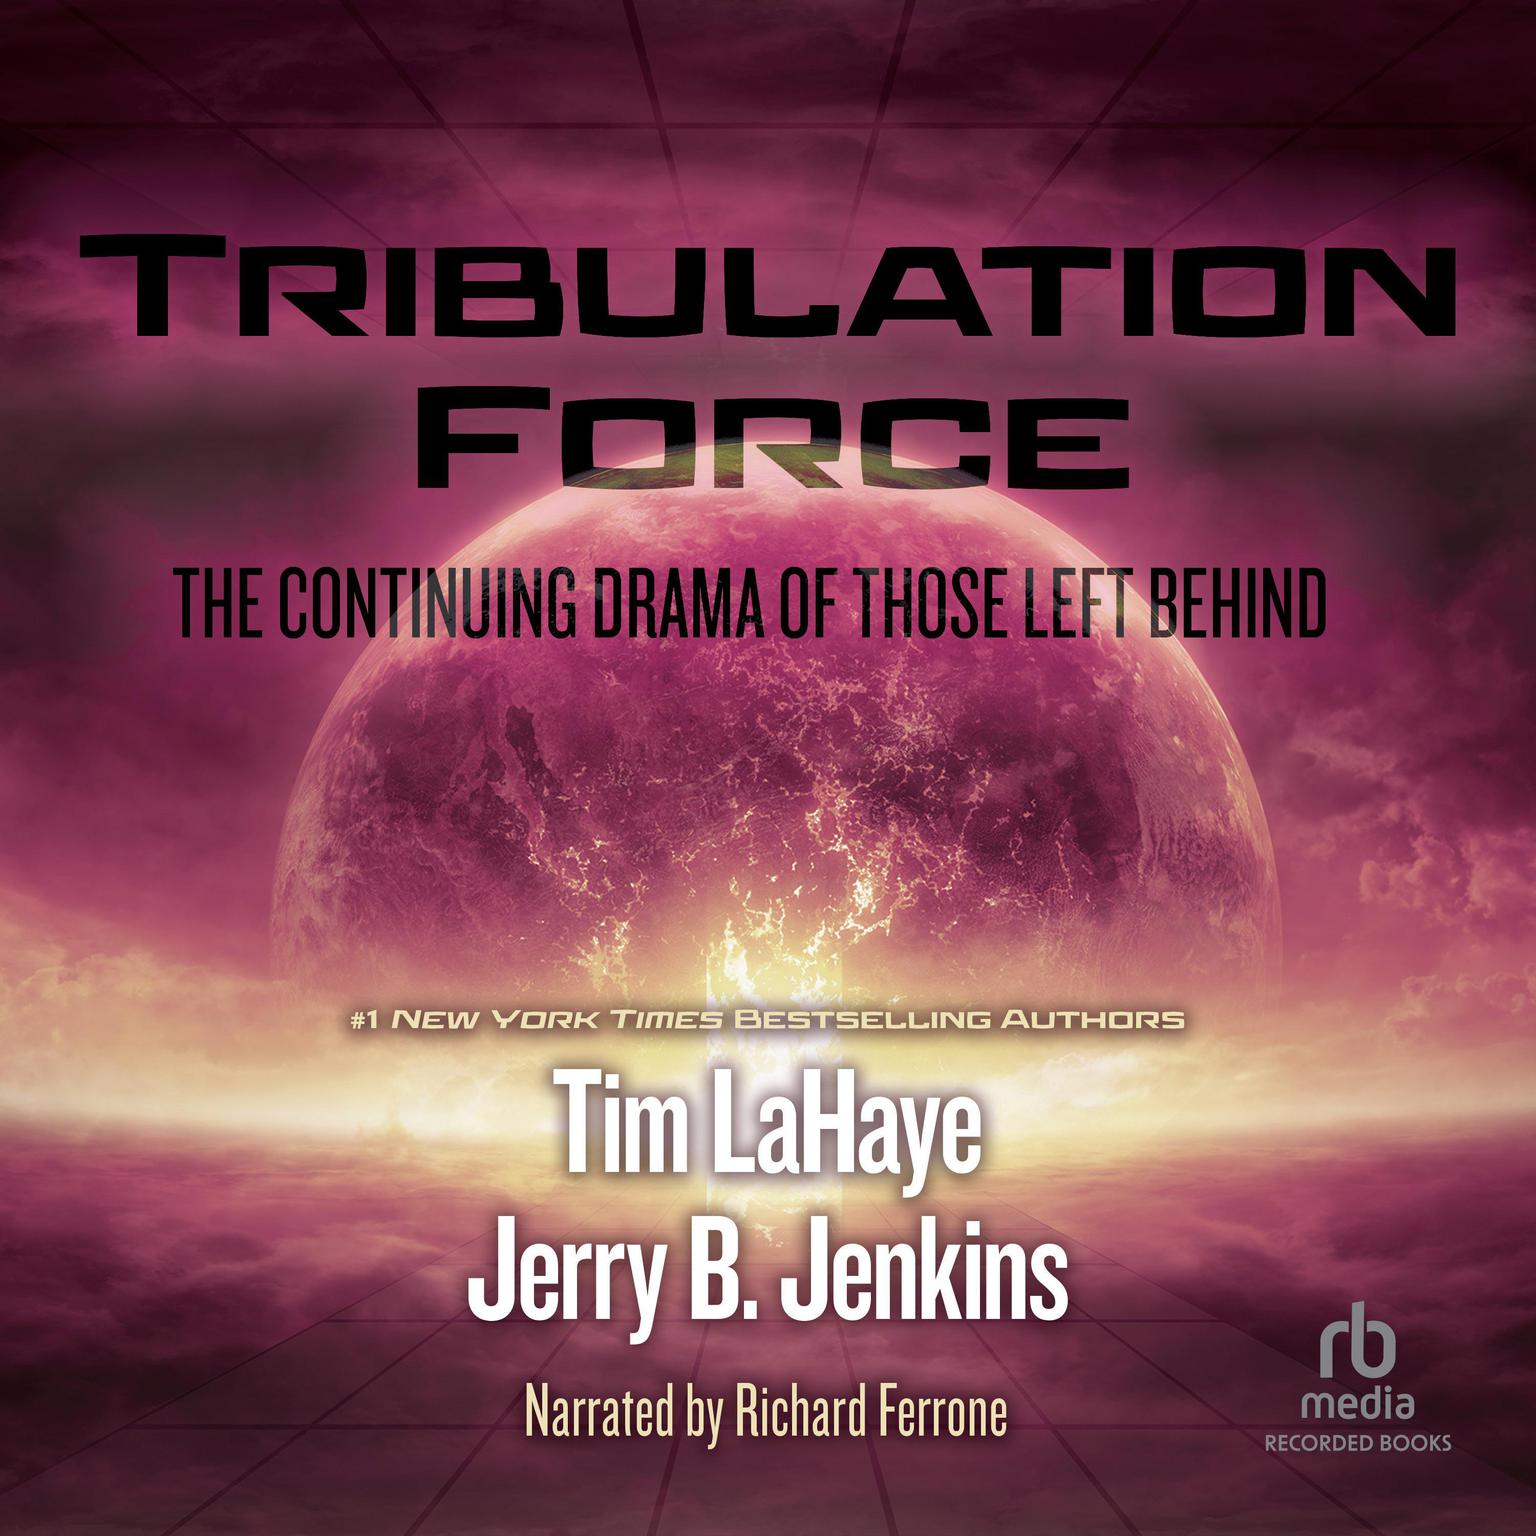 Tribulation Force: The Continuing Drama of Those Left Behind Audiobook, by Tim LaHaye